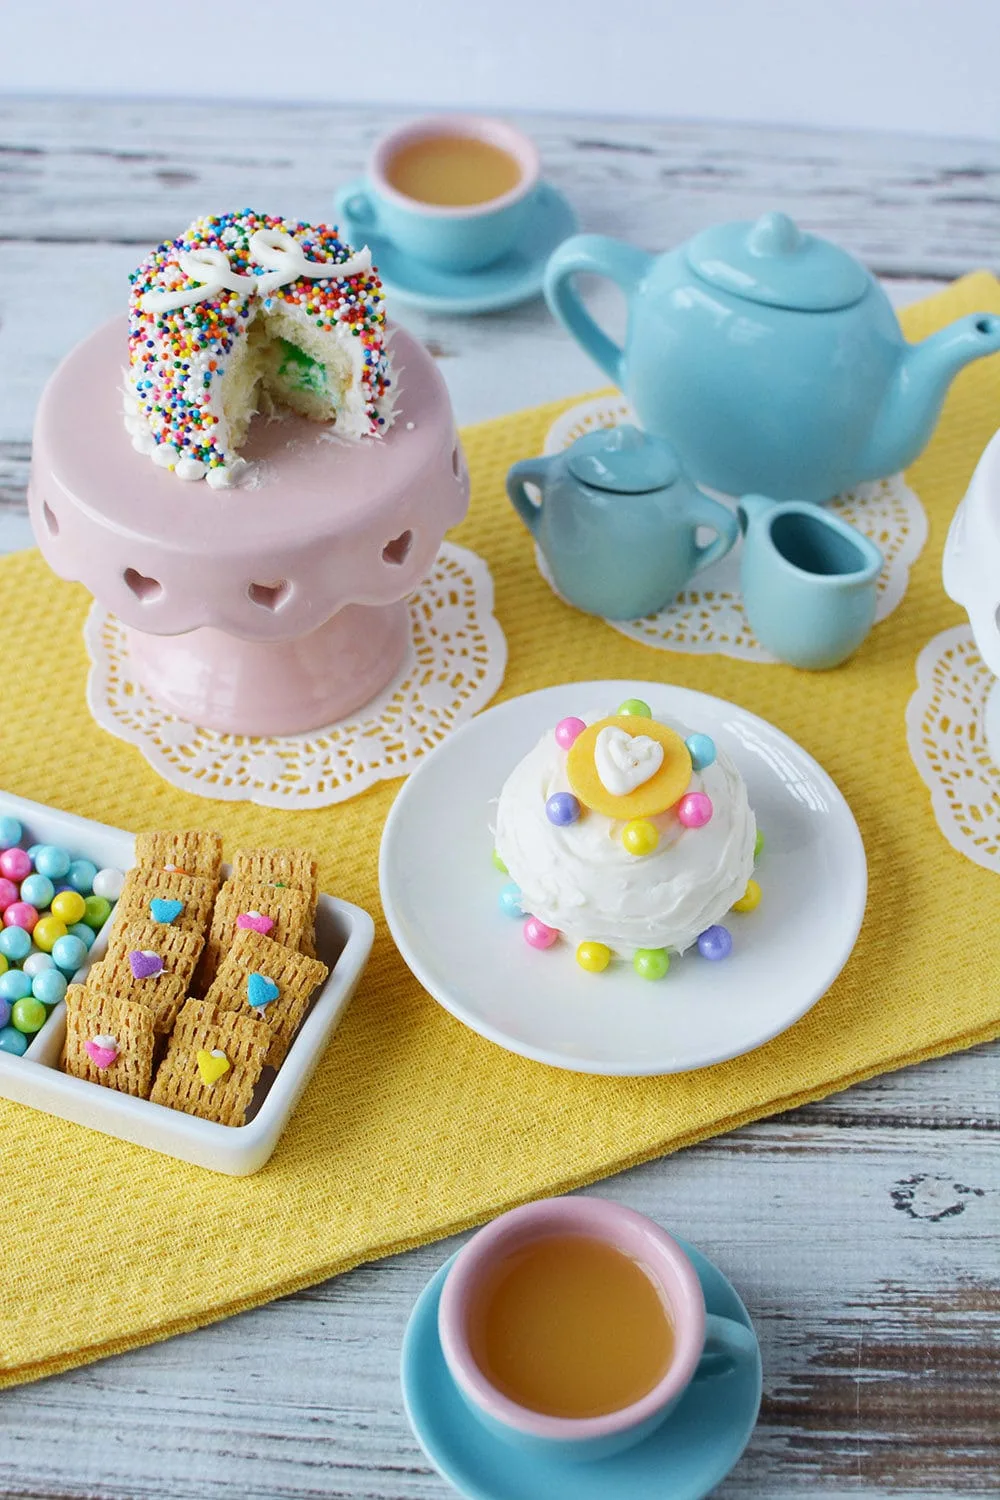 Tea party with fairy cakes and mini desserts.